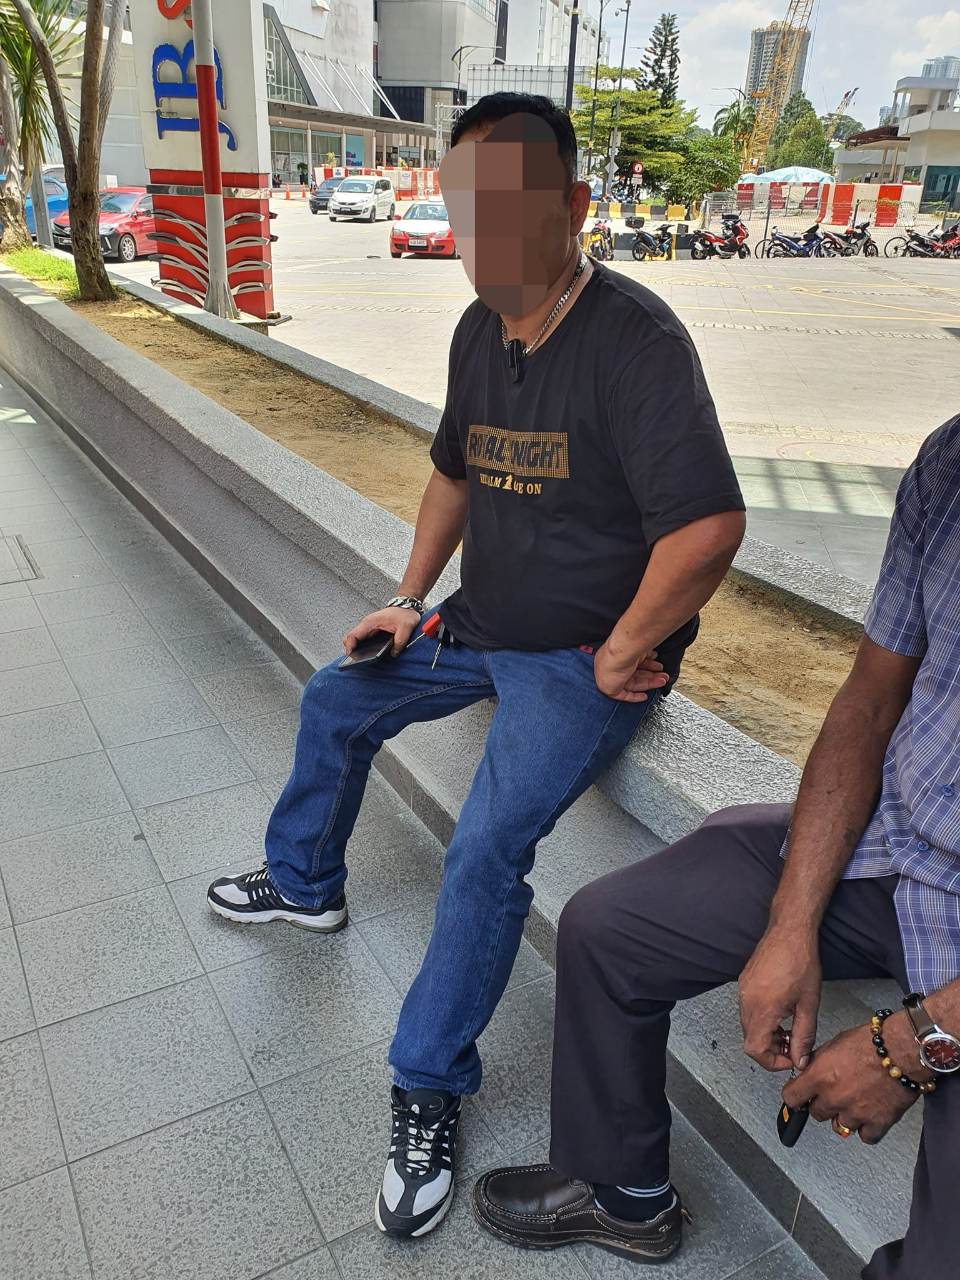 Johor taxi driver allegedly strangles passenger who accused him of overcharging